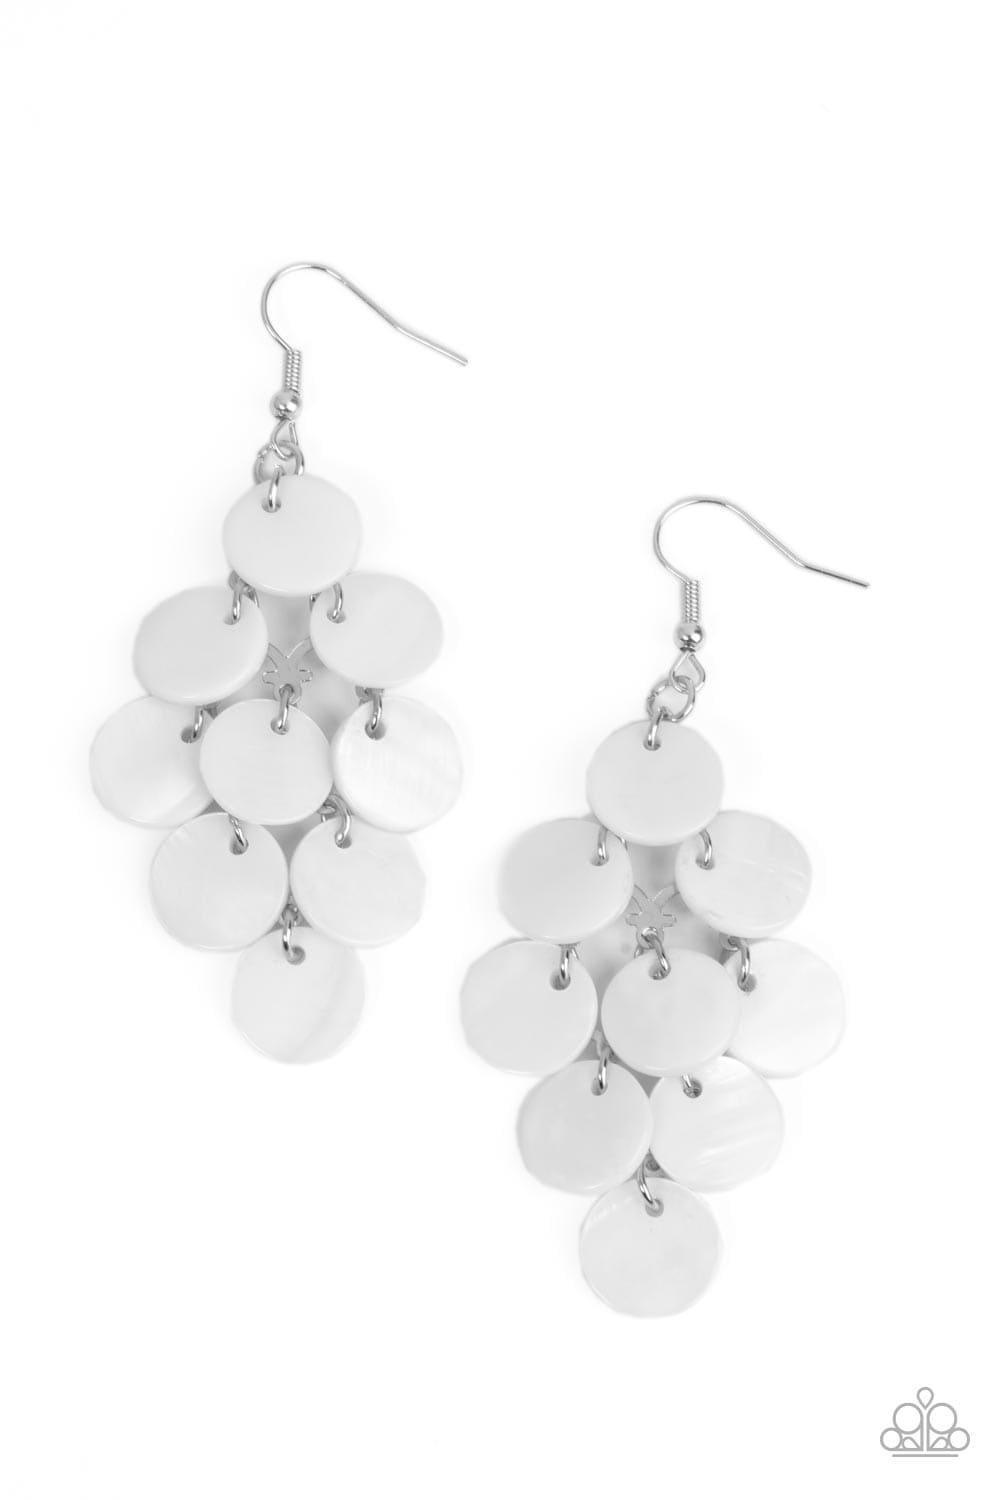 Paparazzi Accessories - Tropical Tryst - White Earrings - Bling by JessieK